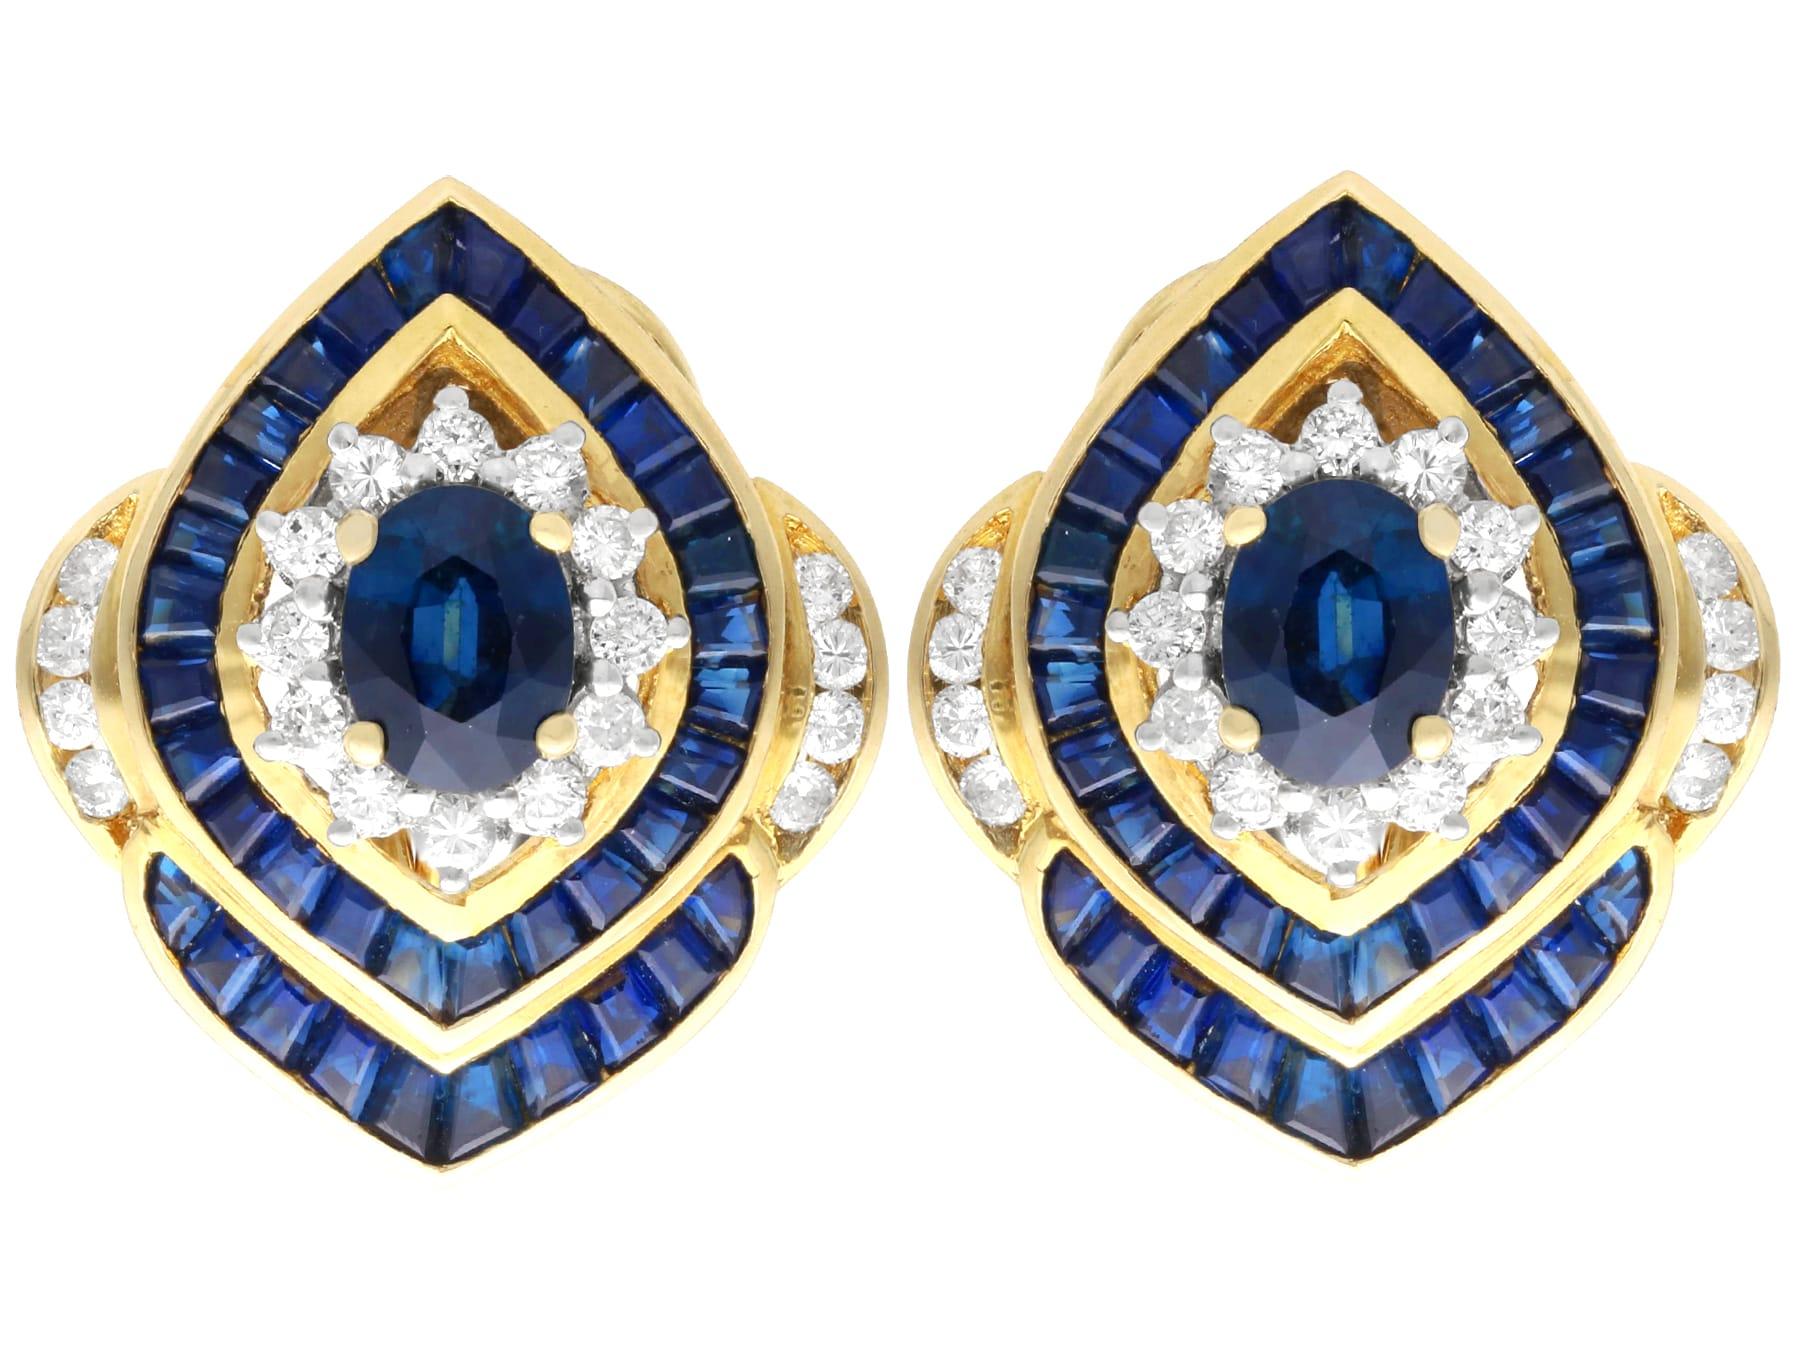 A stunning, fine and impressive pair of vintage 5.20 carat sapphire and 0.90 carat diamond, 18 carat yellow and white gold earrings; part of our diverse gemstone jewellery collections

These fine and impressive vintage sapphire earrings have been